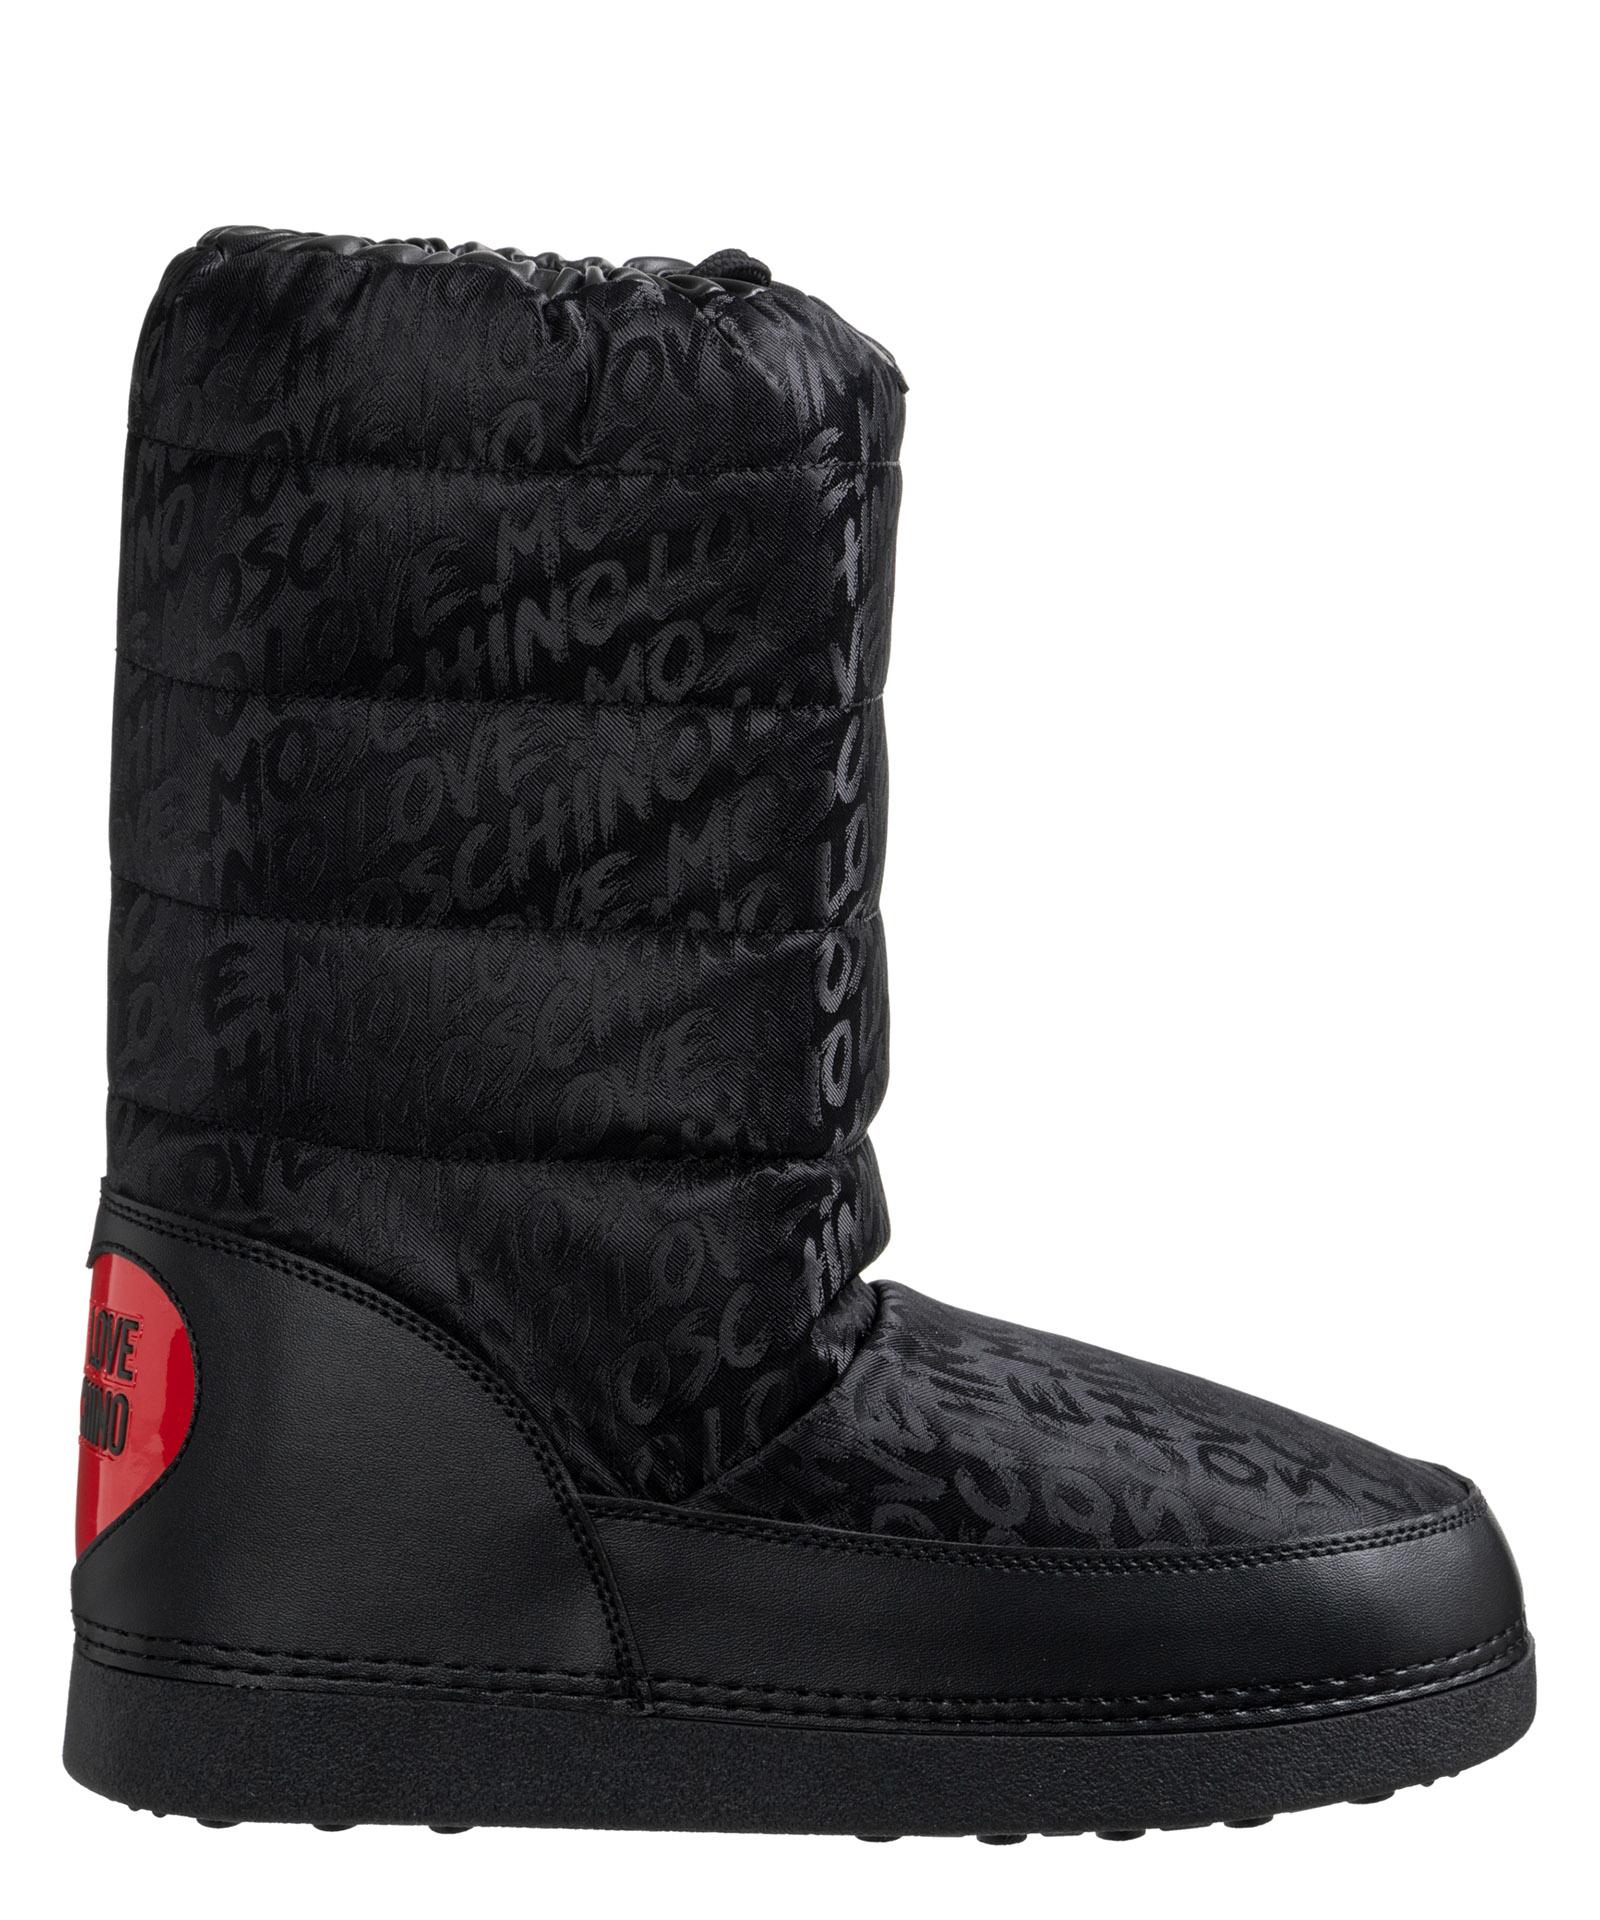 Love Moschino Snow Boots in Black | Lyst